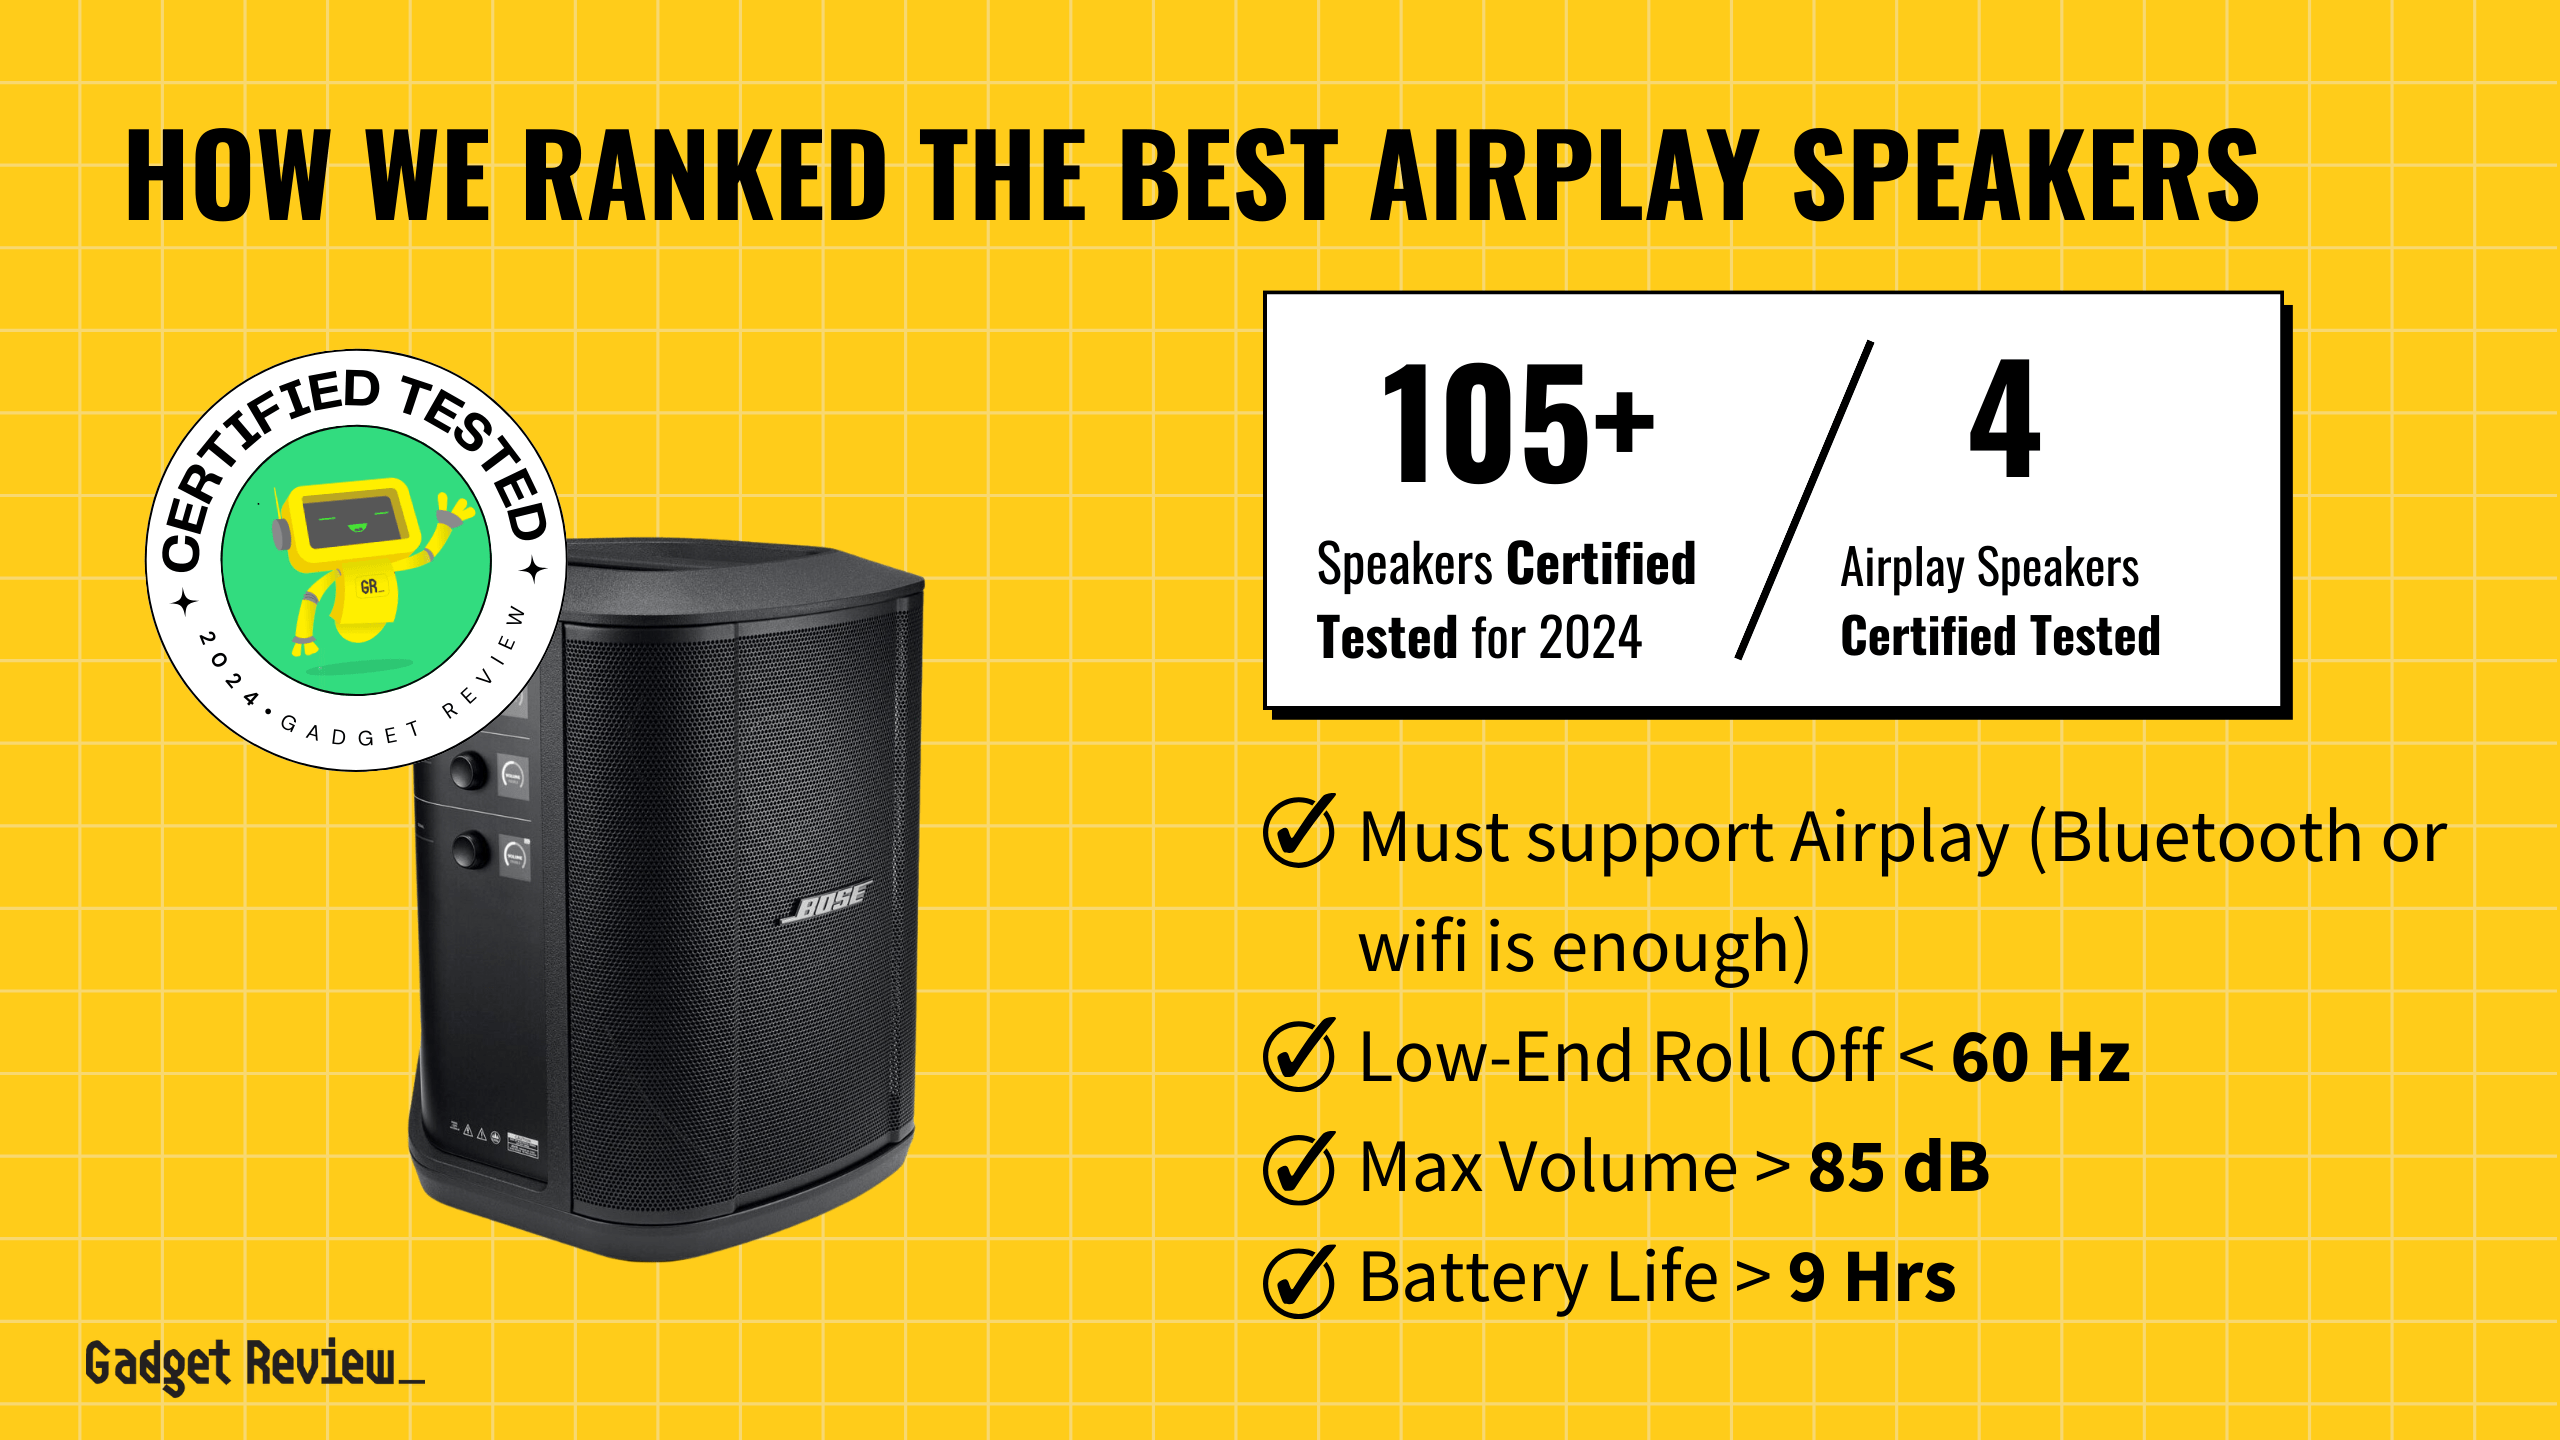 What Are The Top 4 AirPlay Speakers?